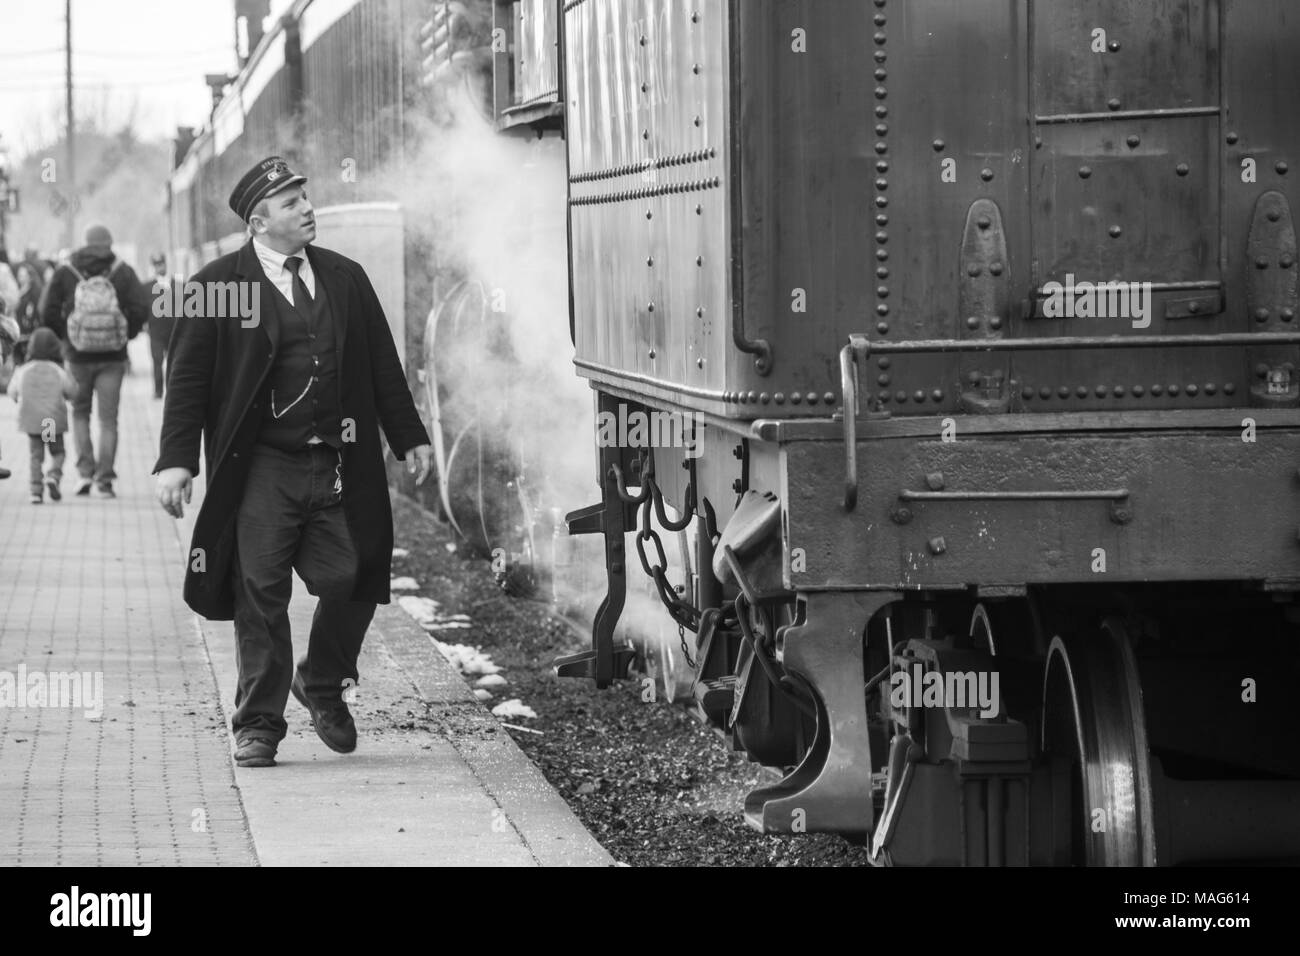 Train conductor Black and White Stock Photos & Images - Alamy